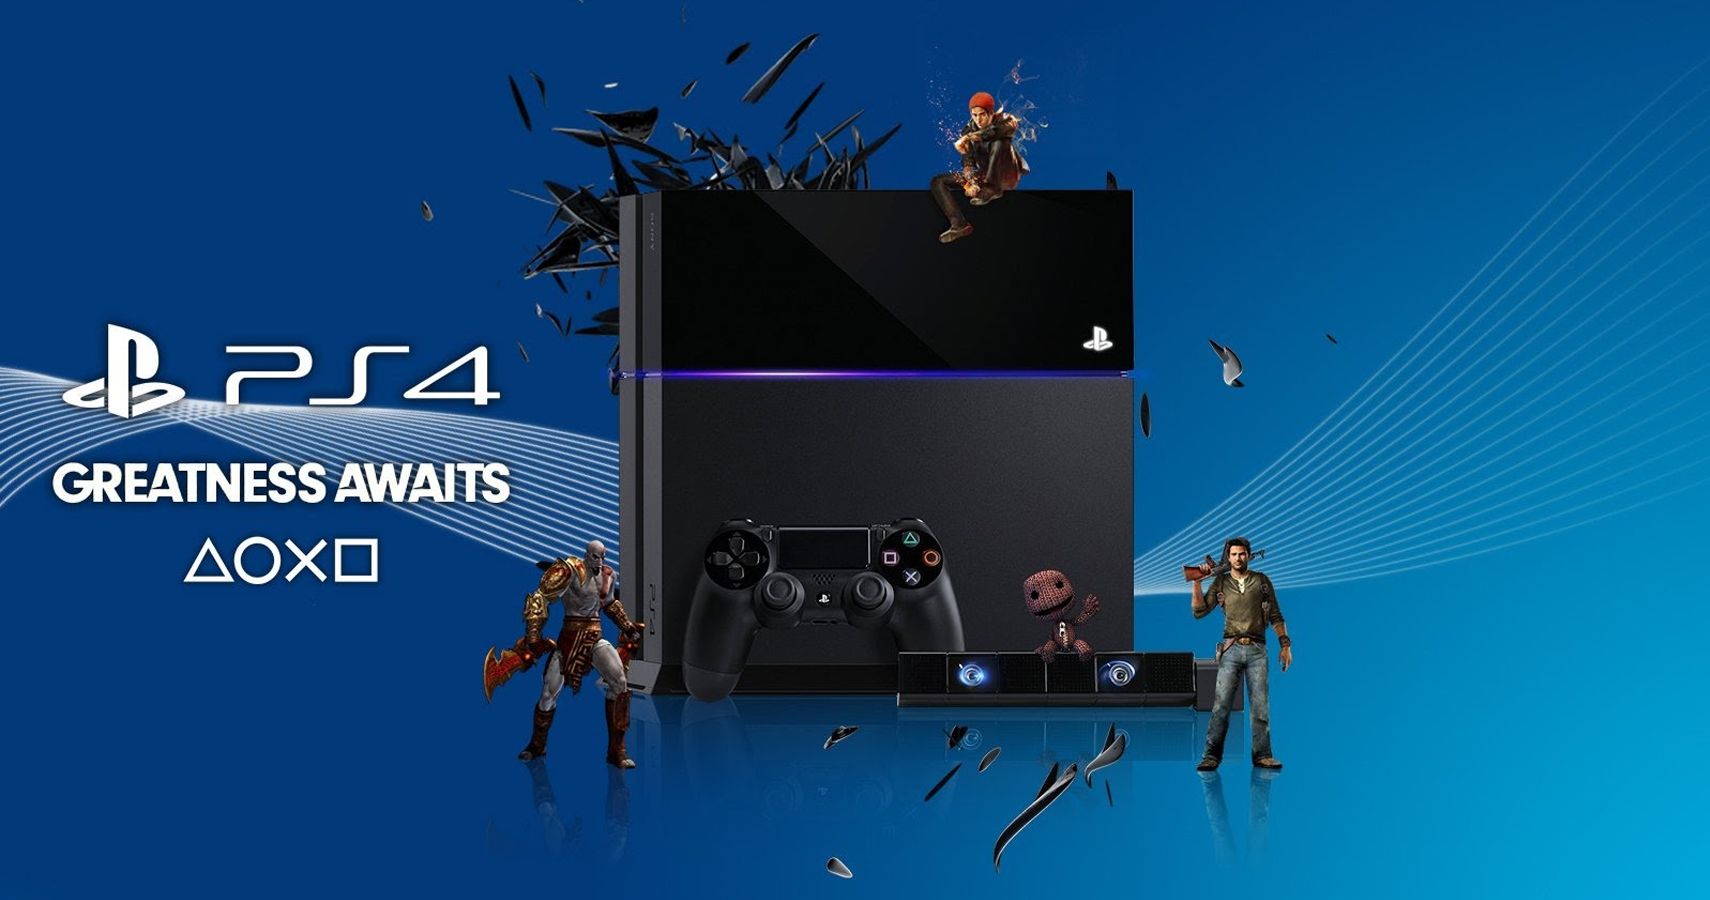 6 Awesome things your PS4 can do